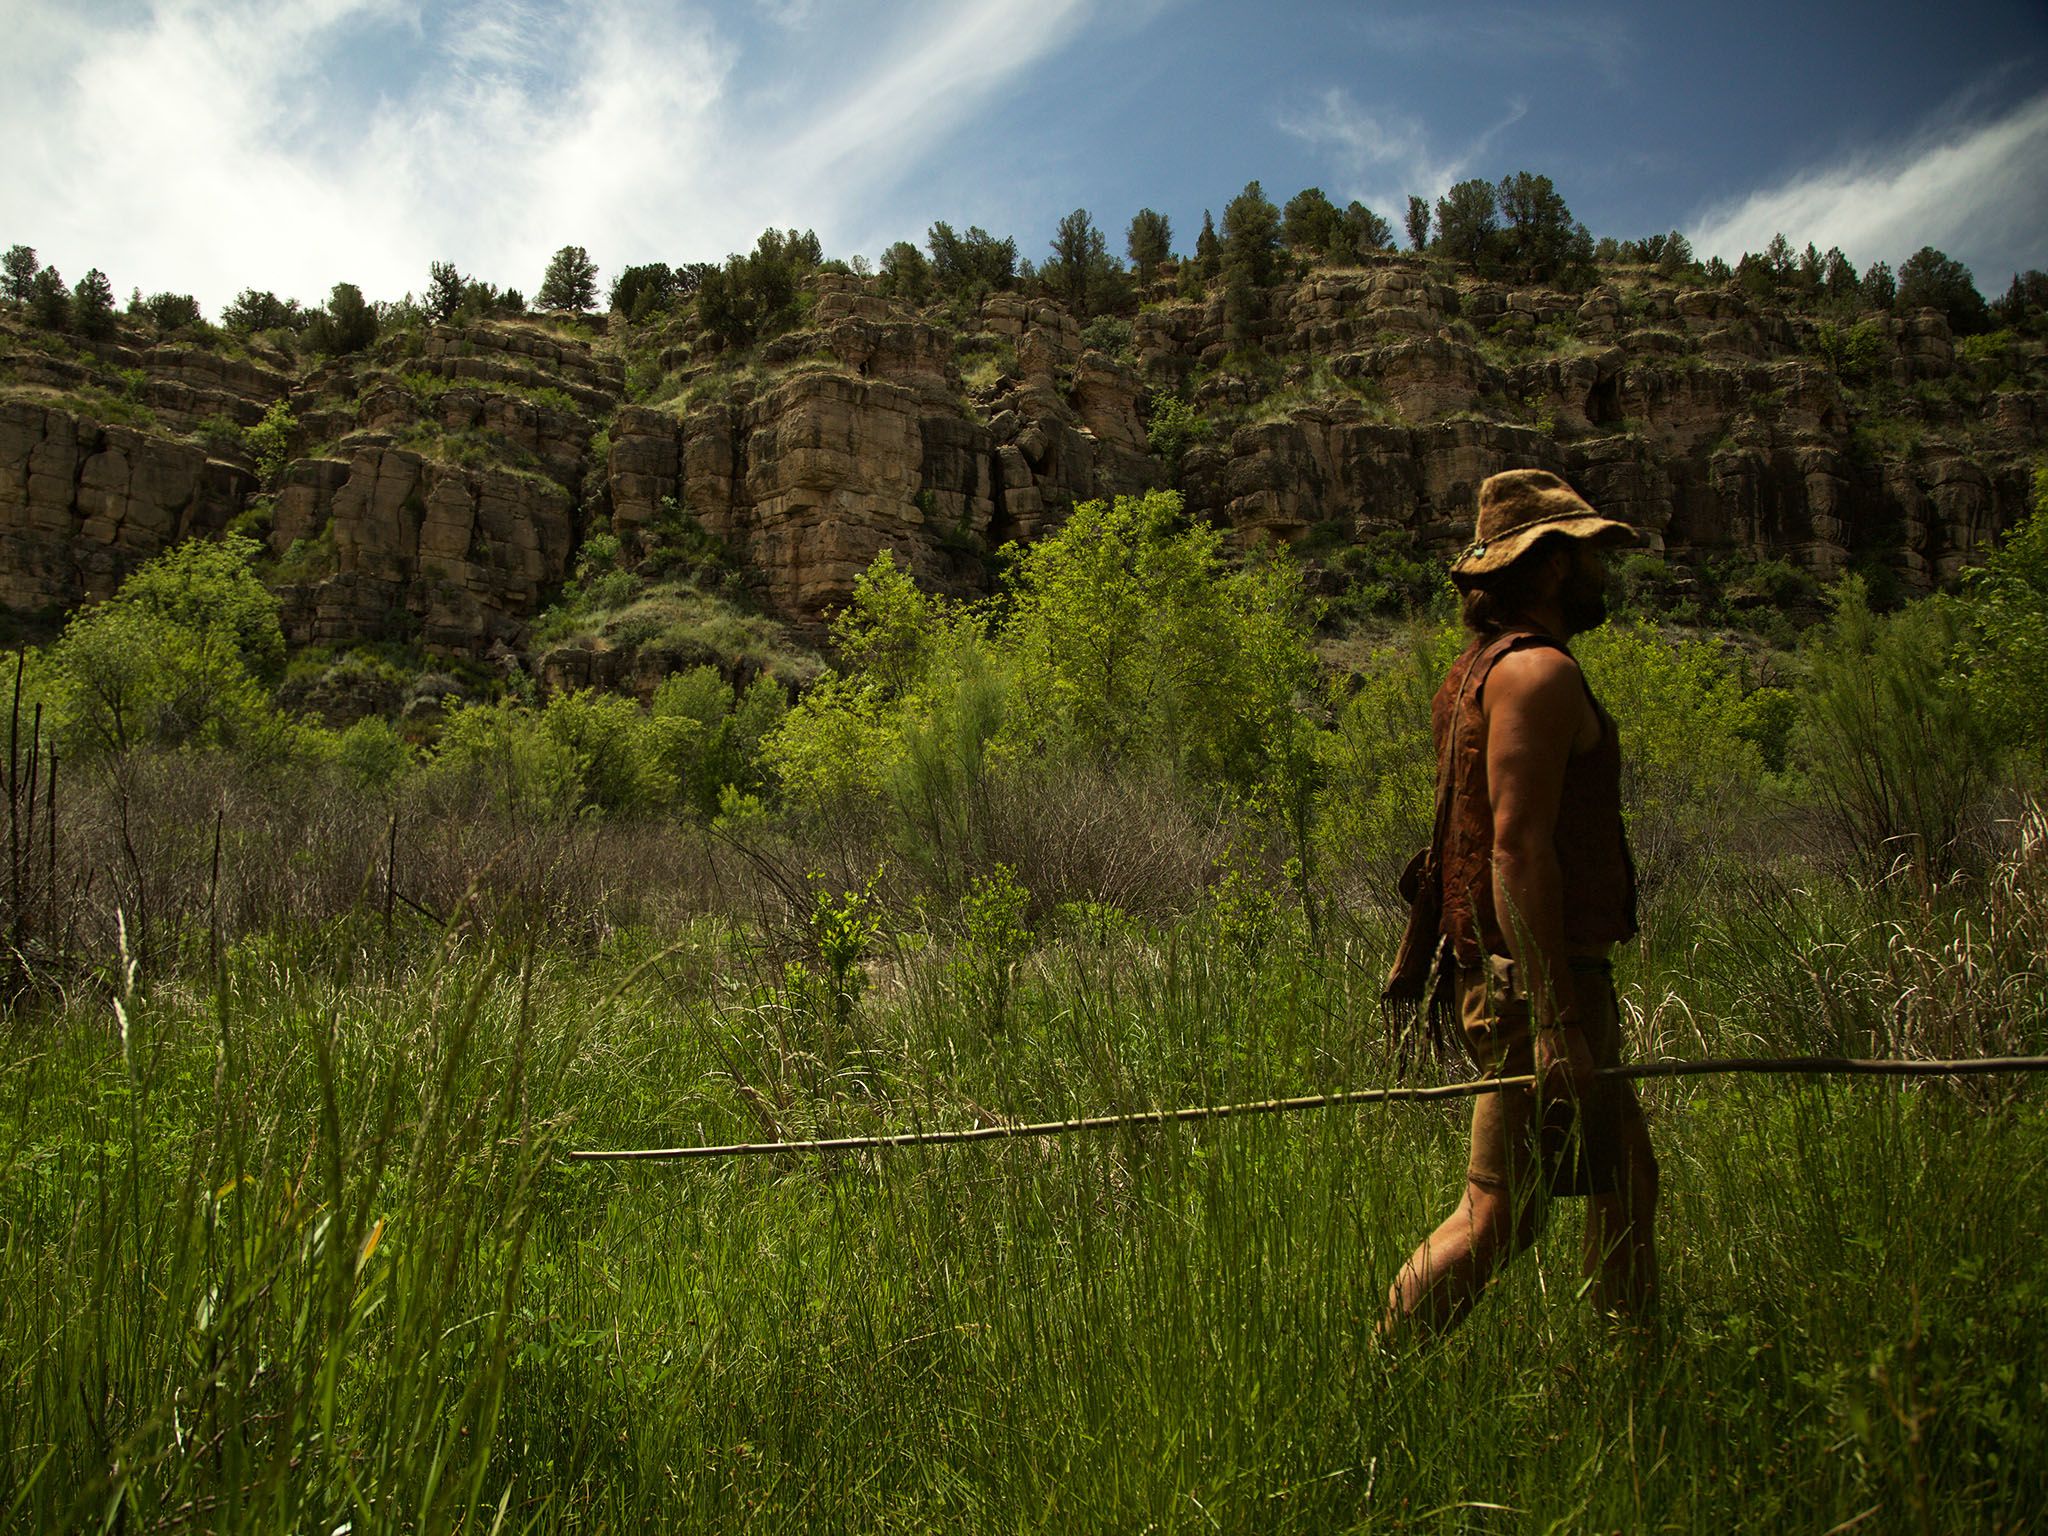 Ash Fork, AZ: Tobias WS walking through foliage. This image is from Live Free or Die. [Photo of the day - ديسمبر 2015]